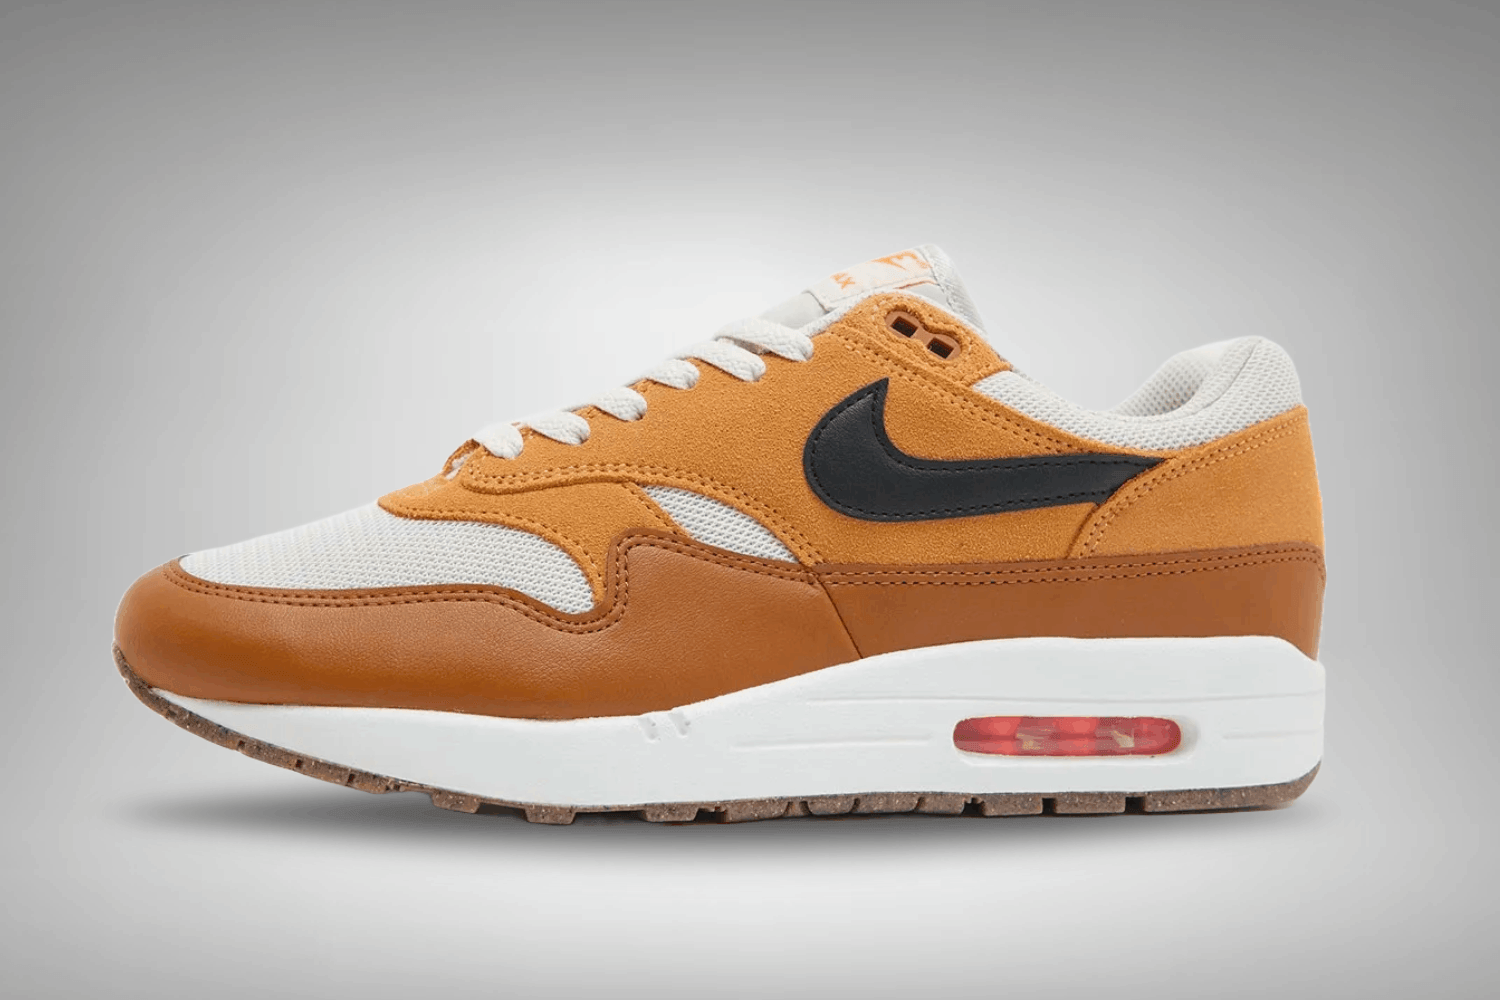 The Nike Air Max 1 gets the familiar 'Escape' look